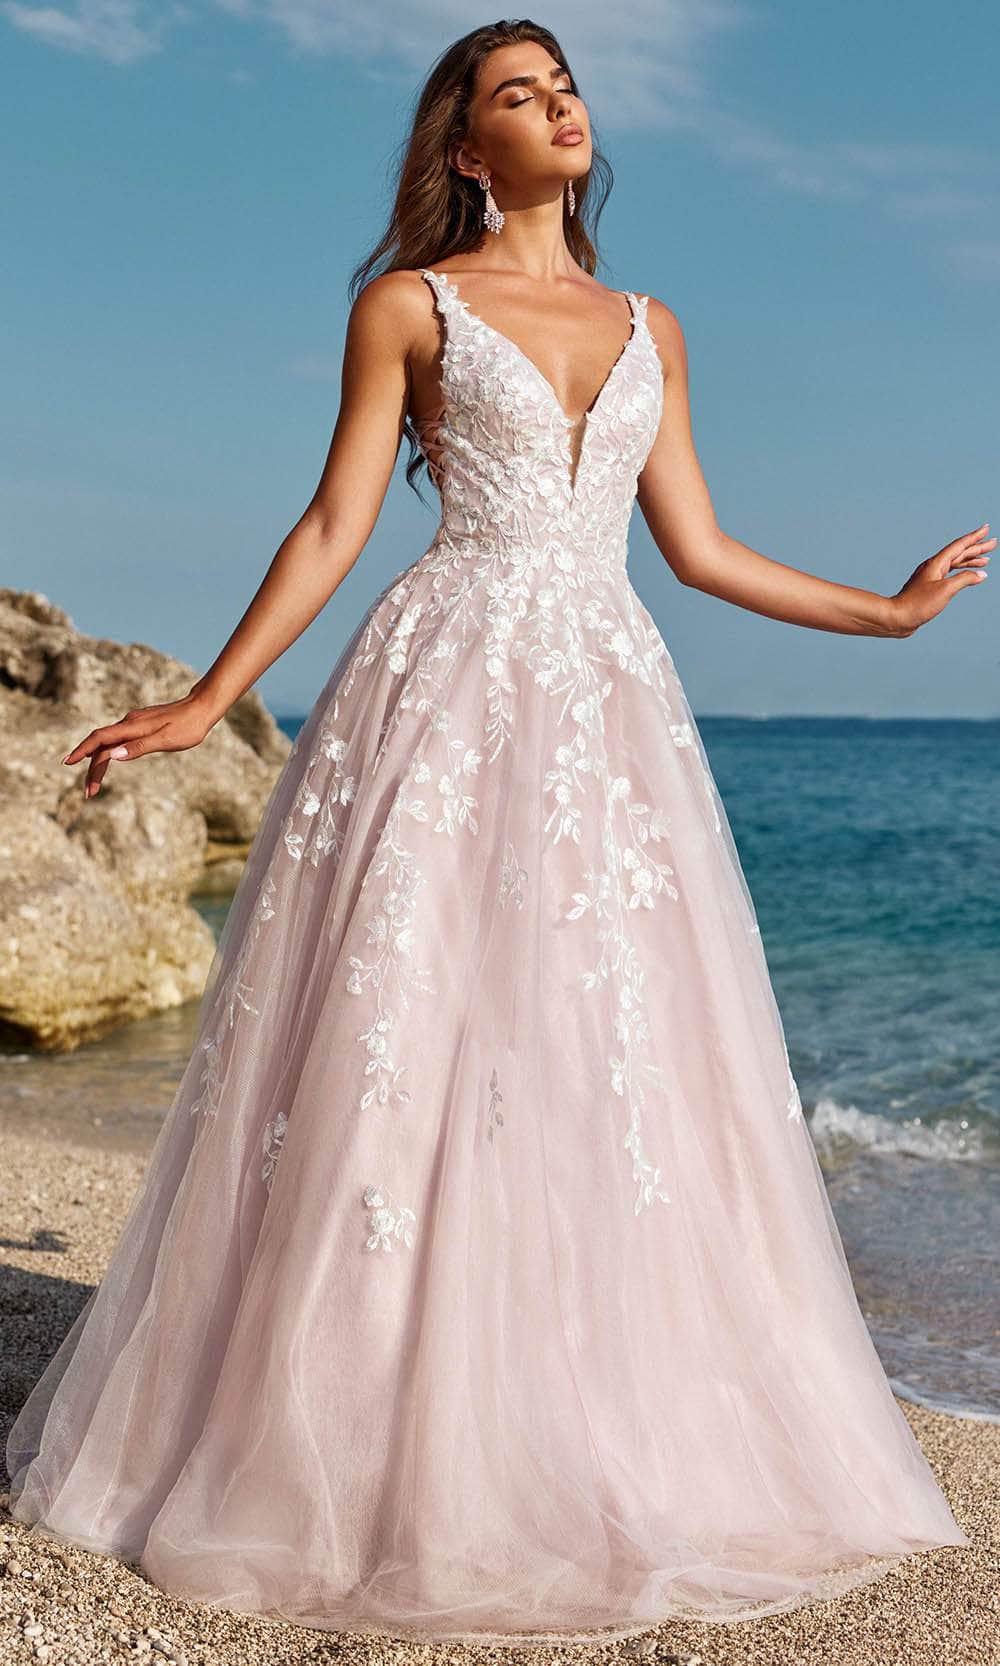 Image of Blush by Alexia Designs 12158 - Embroidered Sleeveless Ballgown